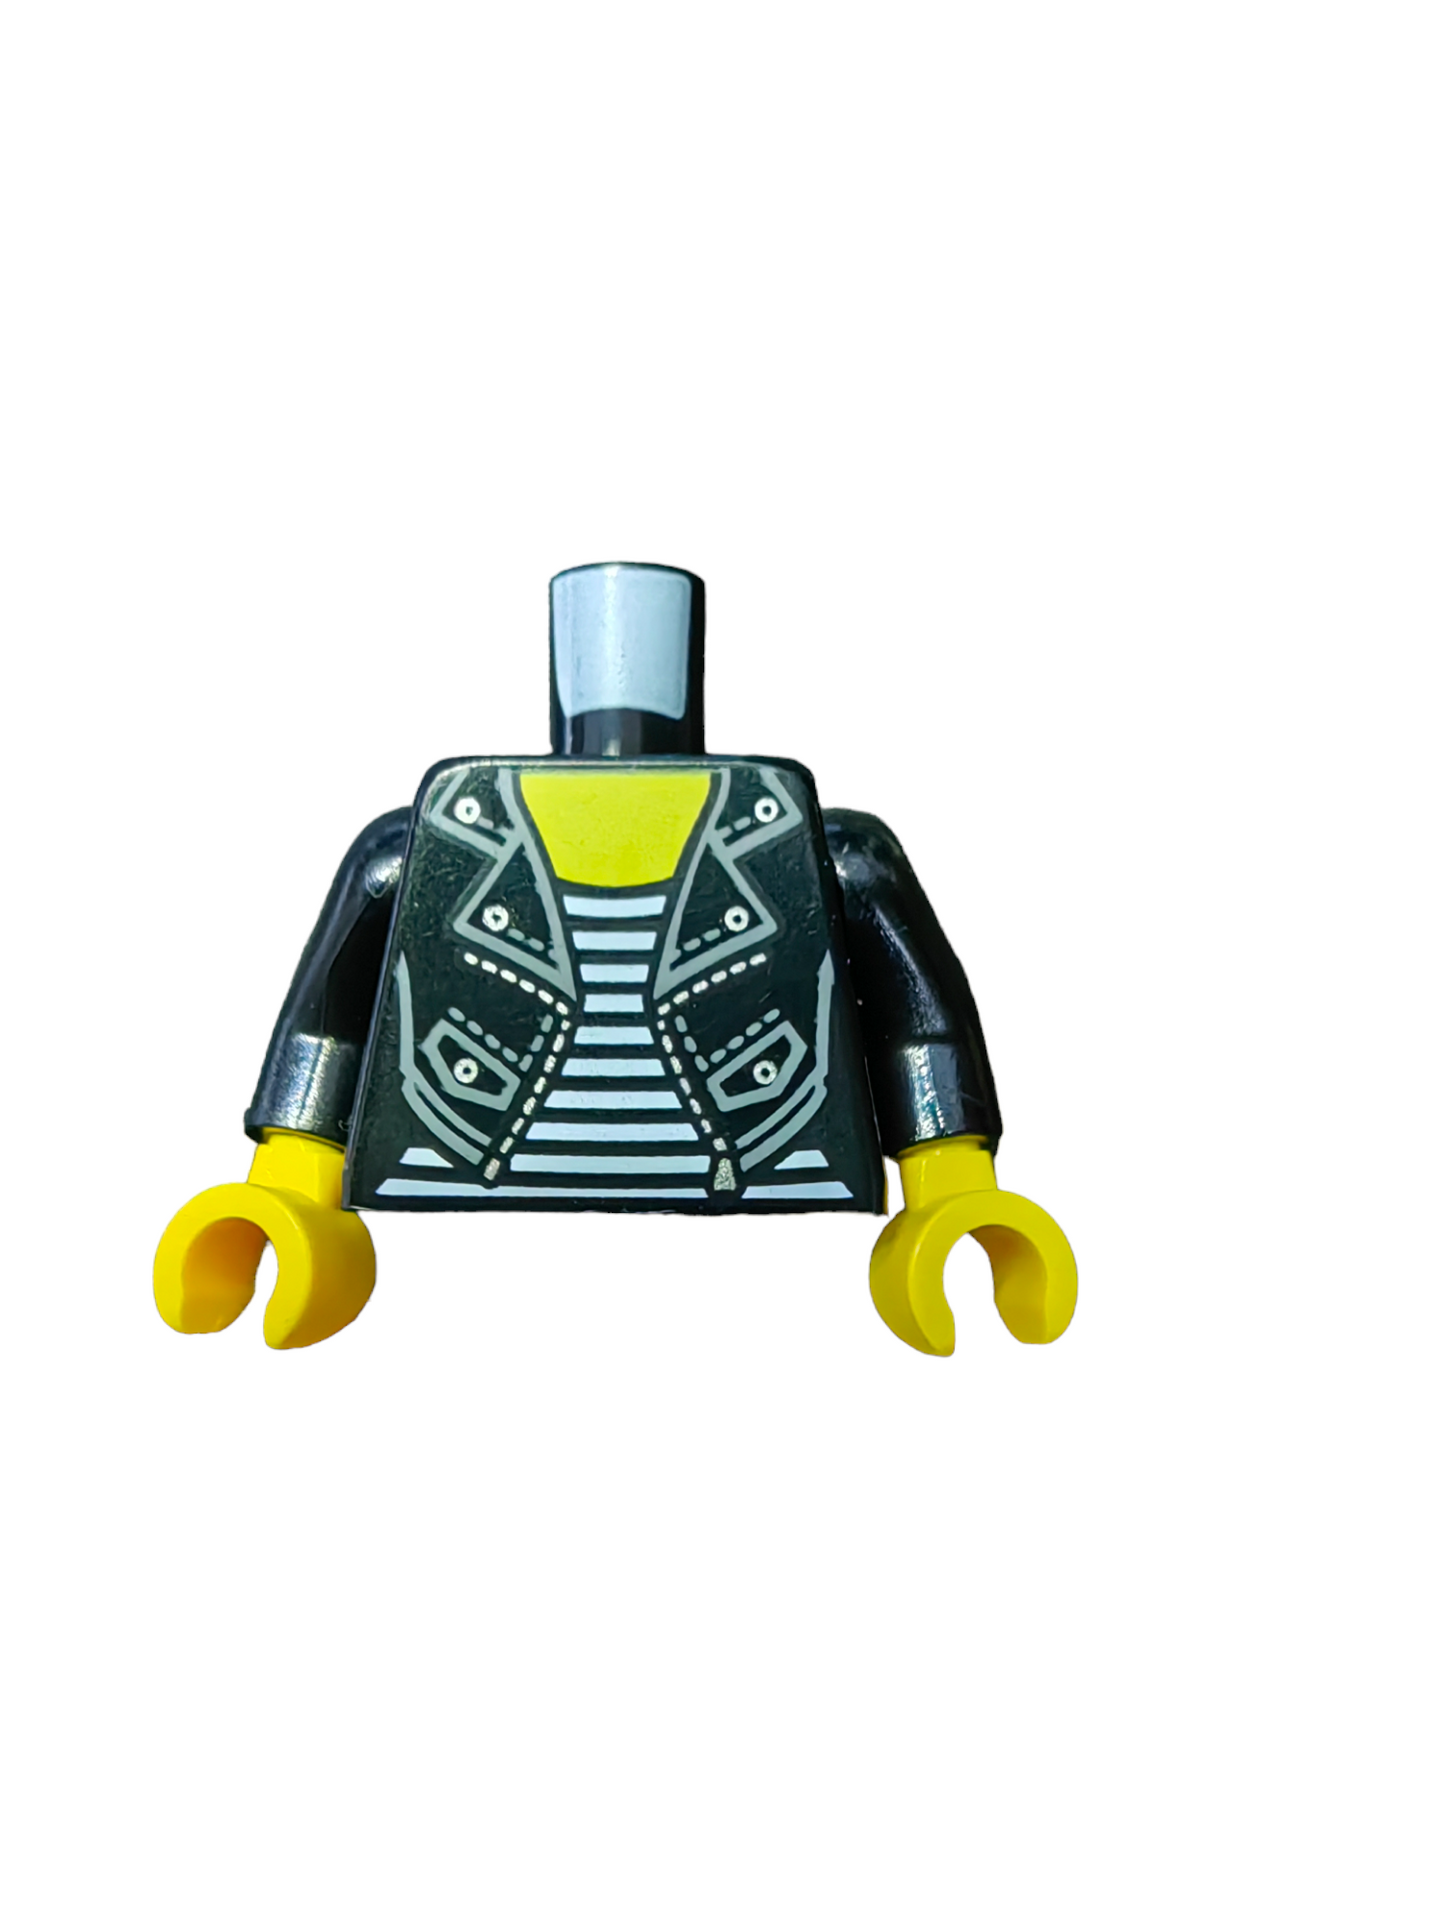 LEGO Torso, Leather Jacket with Silver Studs and Zip with a White Striped Shirt - UB1142